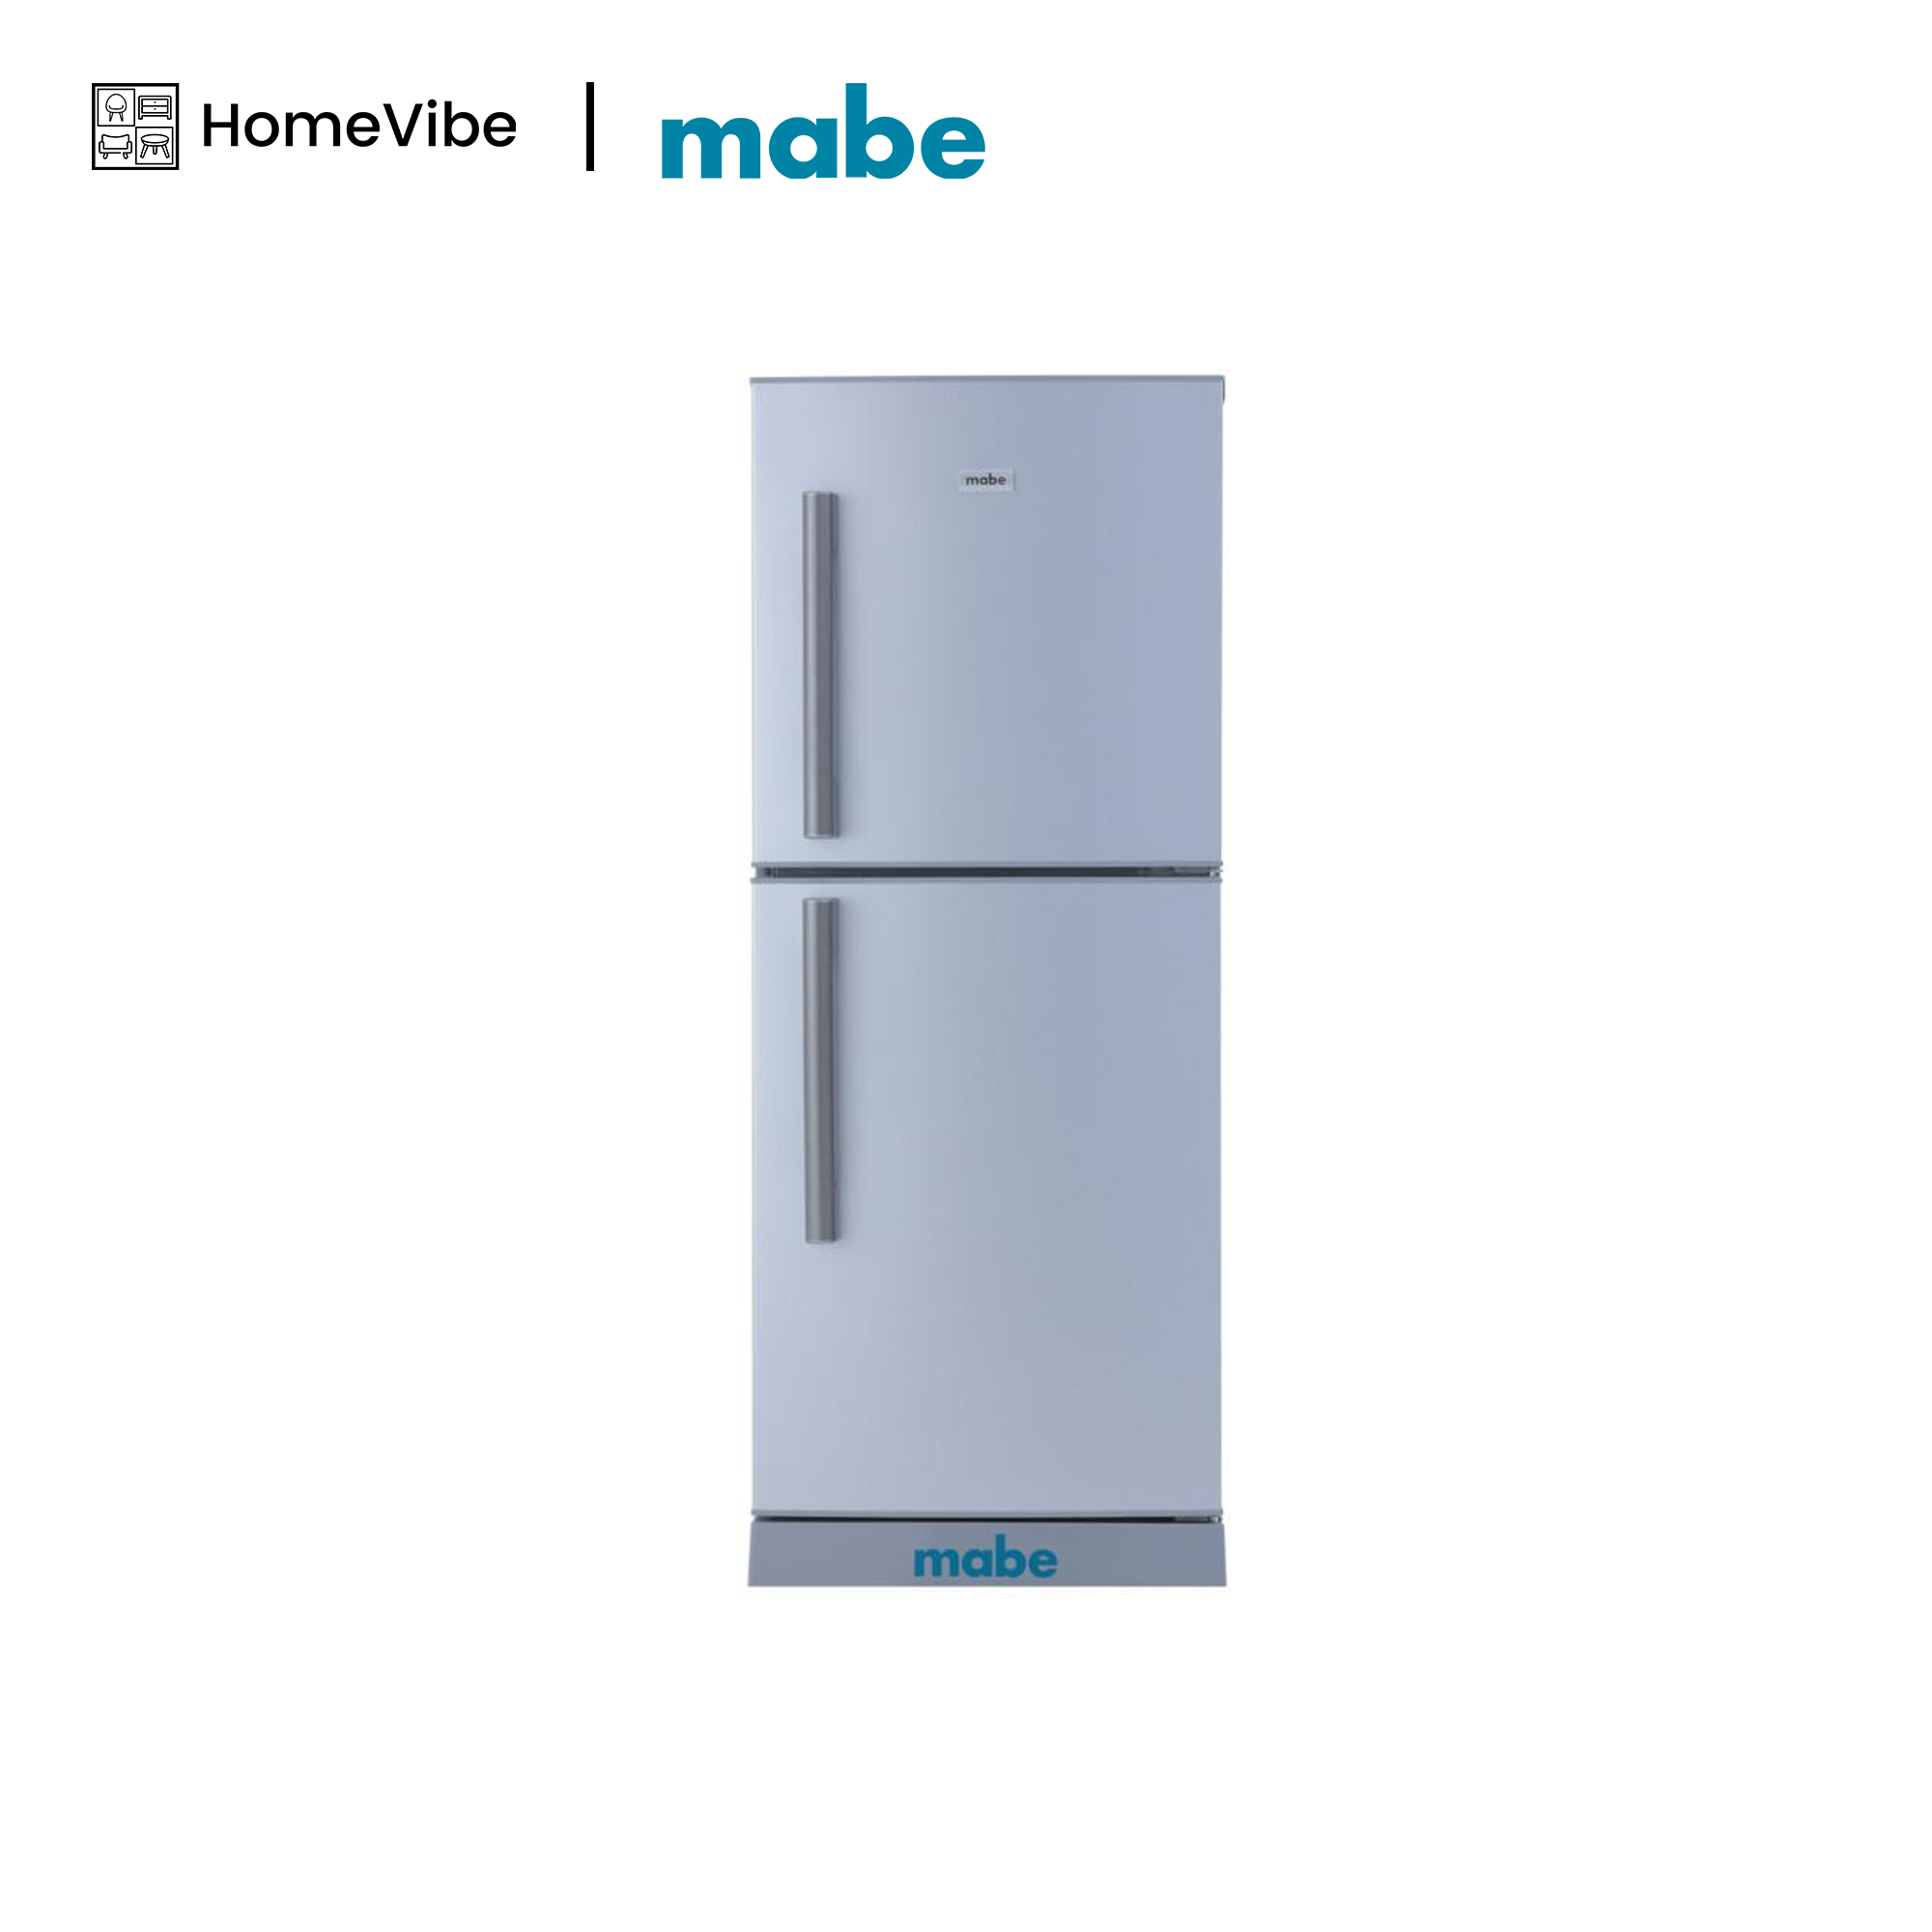 Mabe 7cuft Top Mount Direct Cool Refrigerator MMV070BAFRSG